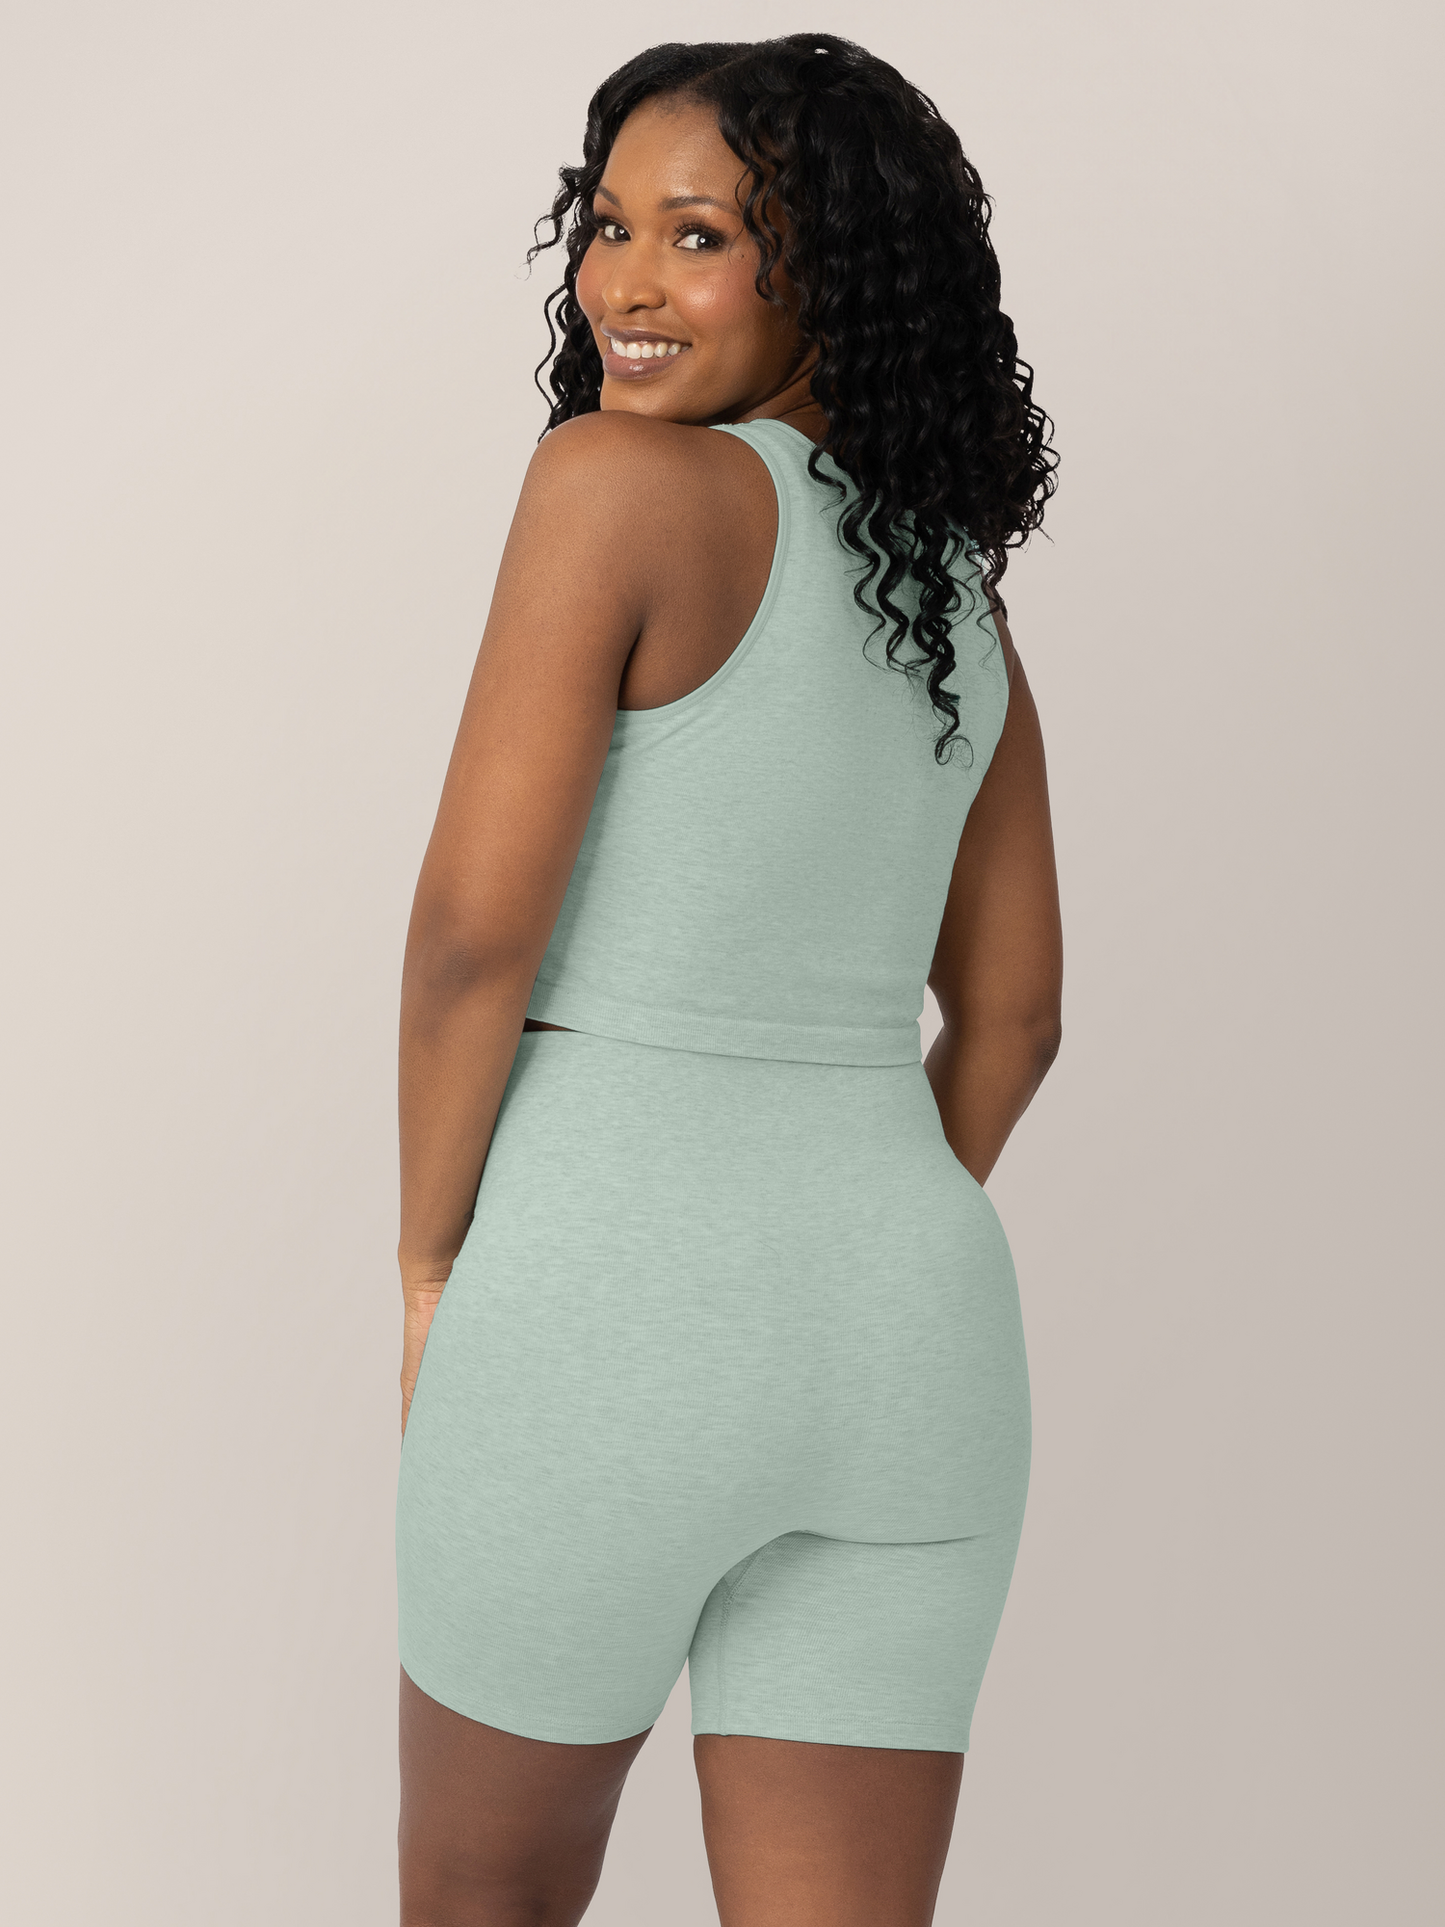 Back view of model  wearing the Sublime® Bamboo Maternity & Postpartum Bike Short in Dusty Blue Green Heather, paired with the matching Sublime® Bamboo Maternity & Nursing Longline Bra